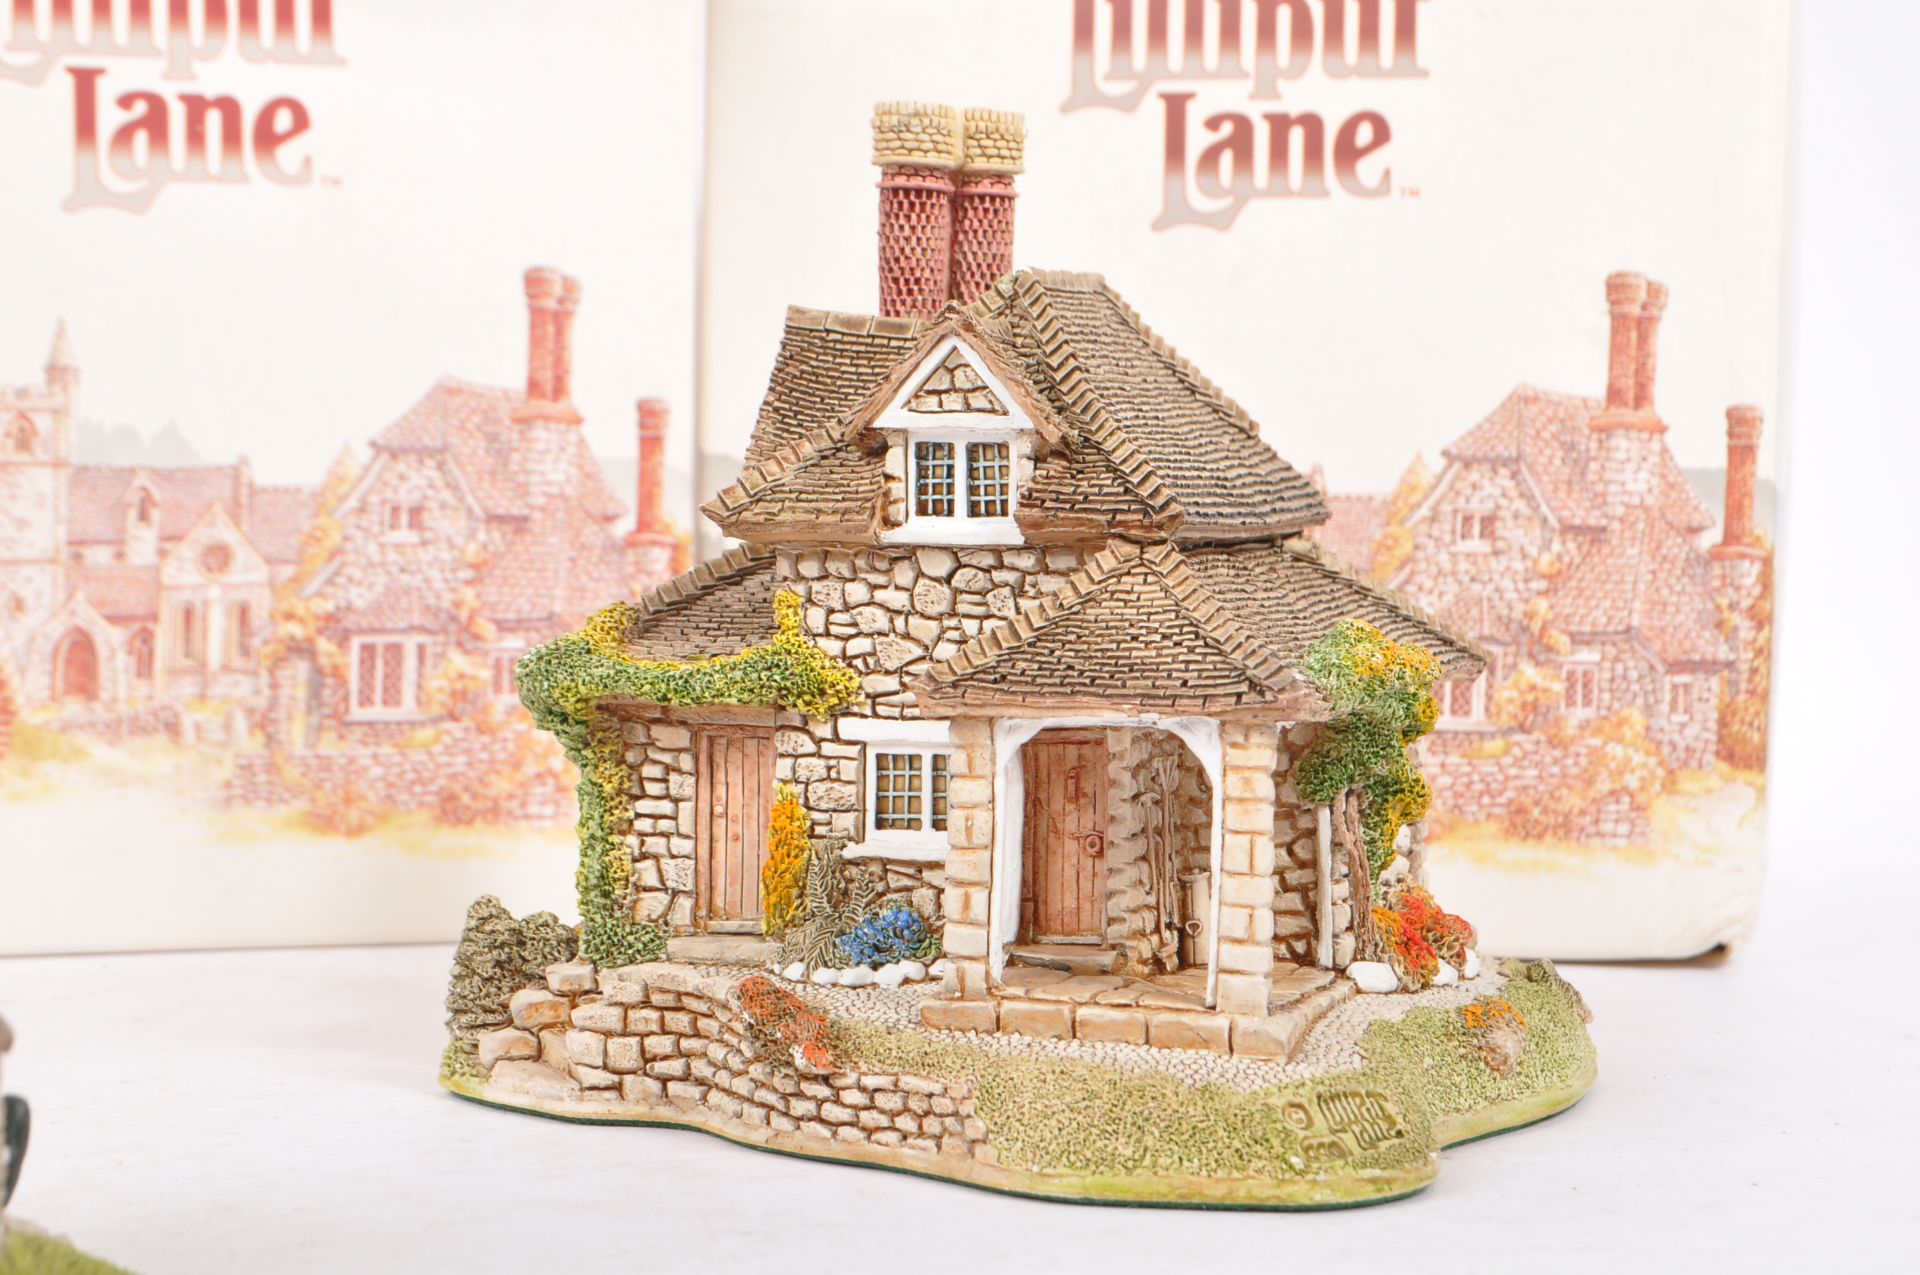 LILLIPUT LANE - COLLECTION OF HOUSE / COTTAGE FIGURINES - Image 7 of 15